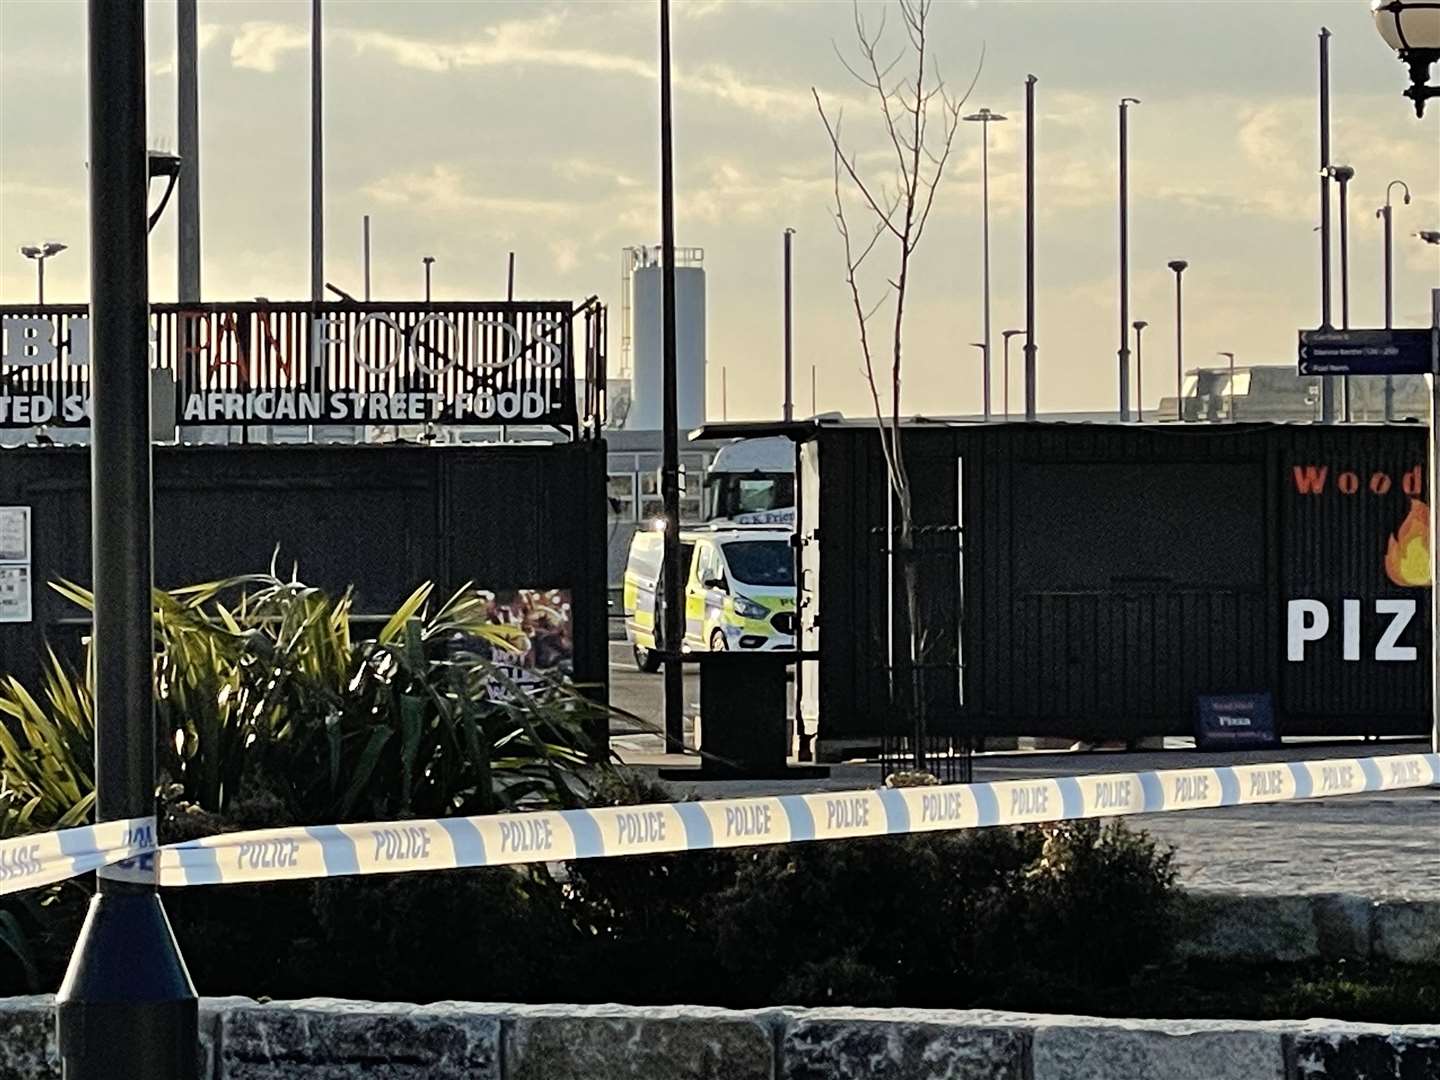 Police taped off the marina the morning of the tragedy in the Channel